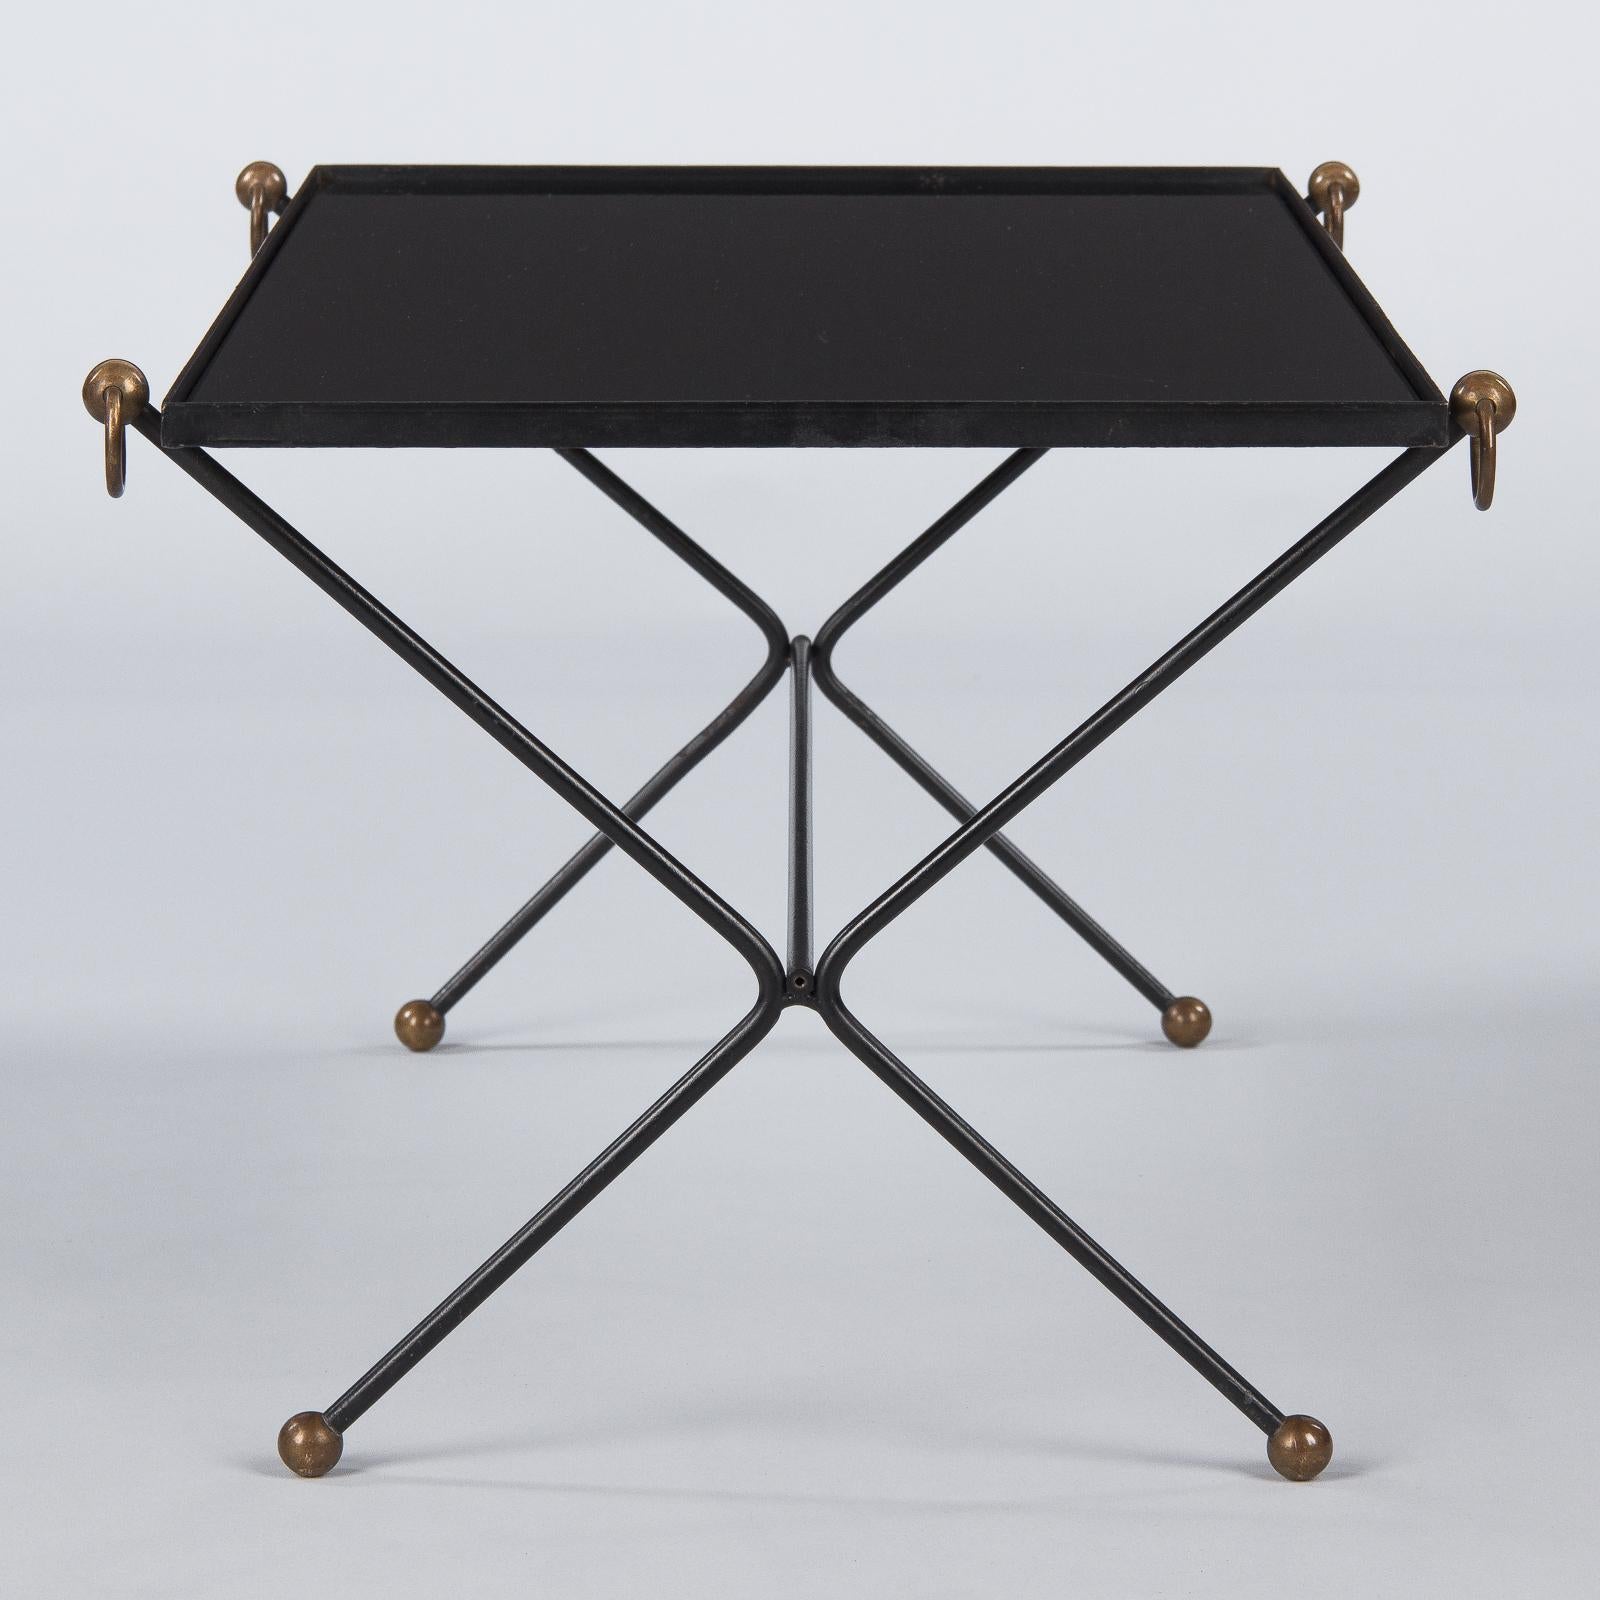 20th Century French Iron Coffee Table Attributed to Jacques Adnet, 1950s